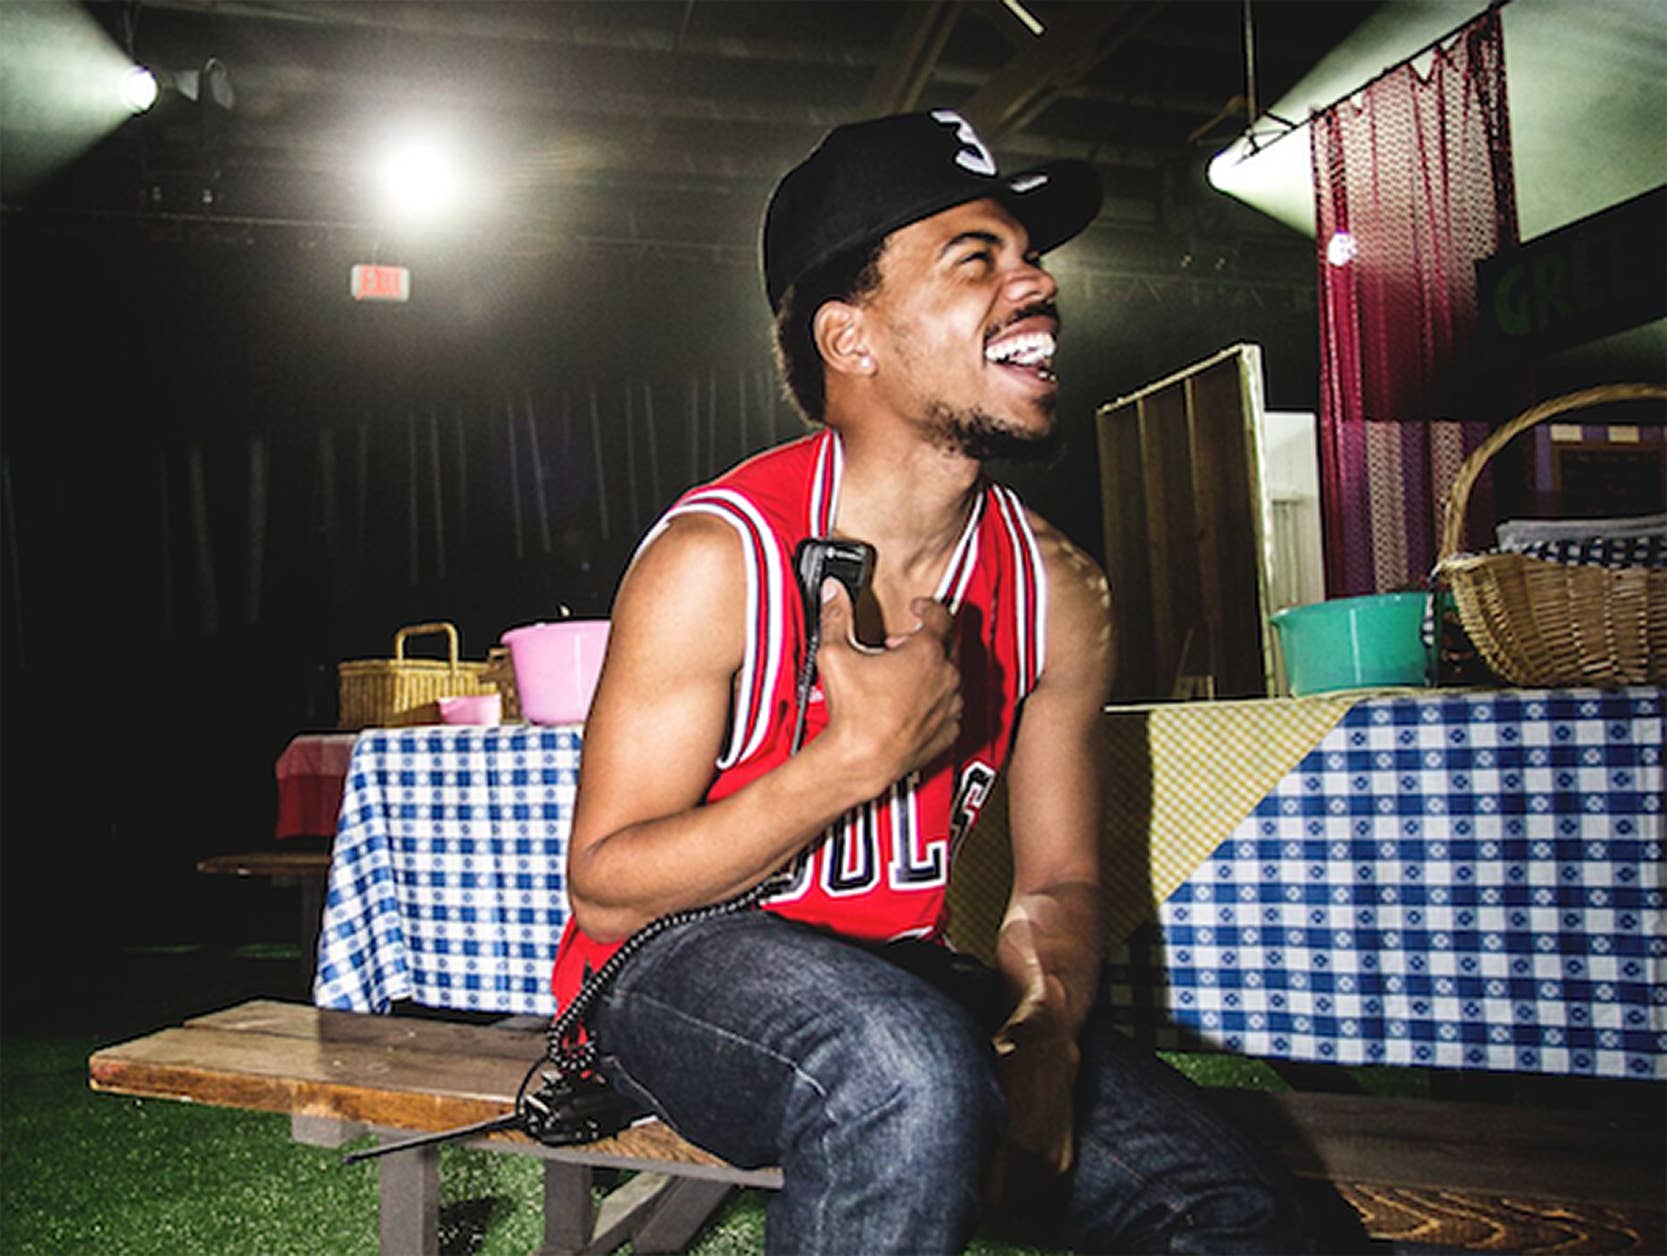 chance the rapper magnificent coloring world